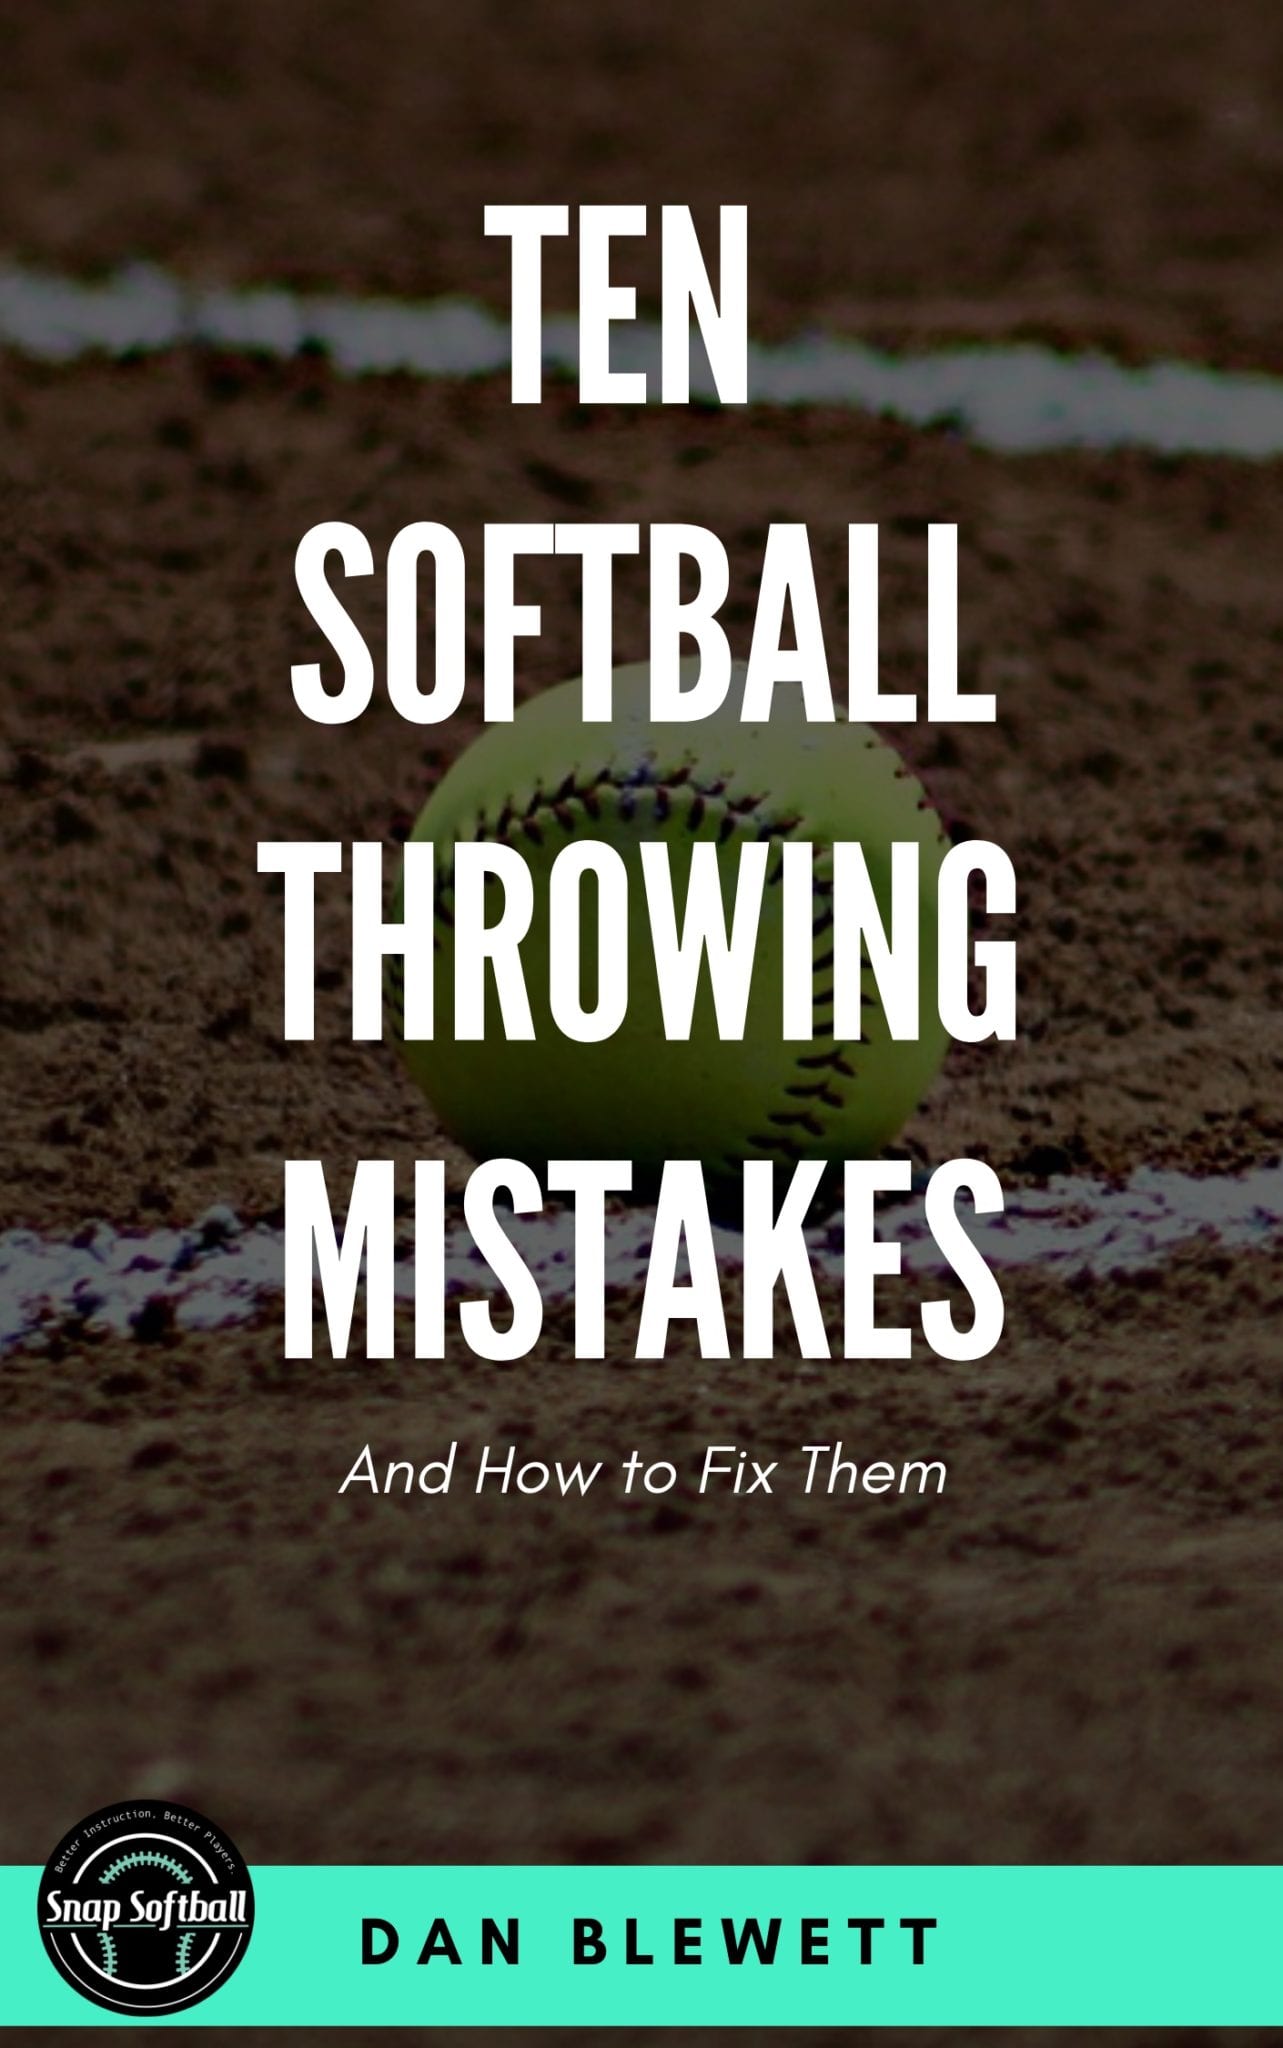 Improve Softball Throwing Velocity With These Infield Footwork Tips